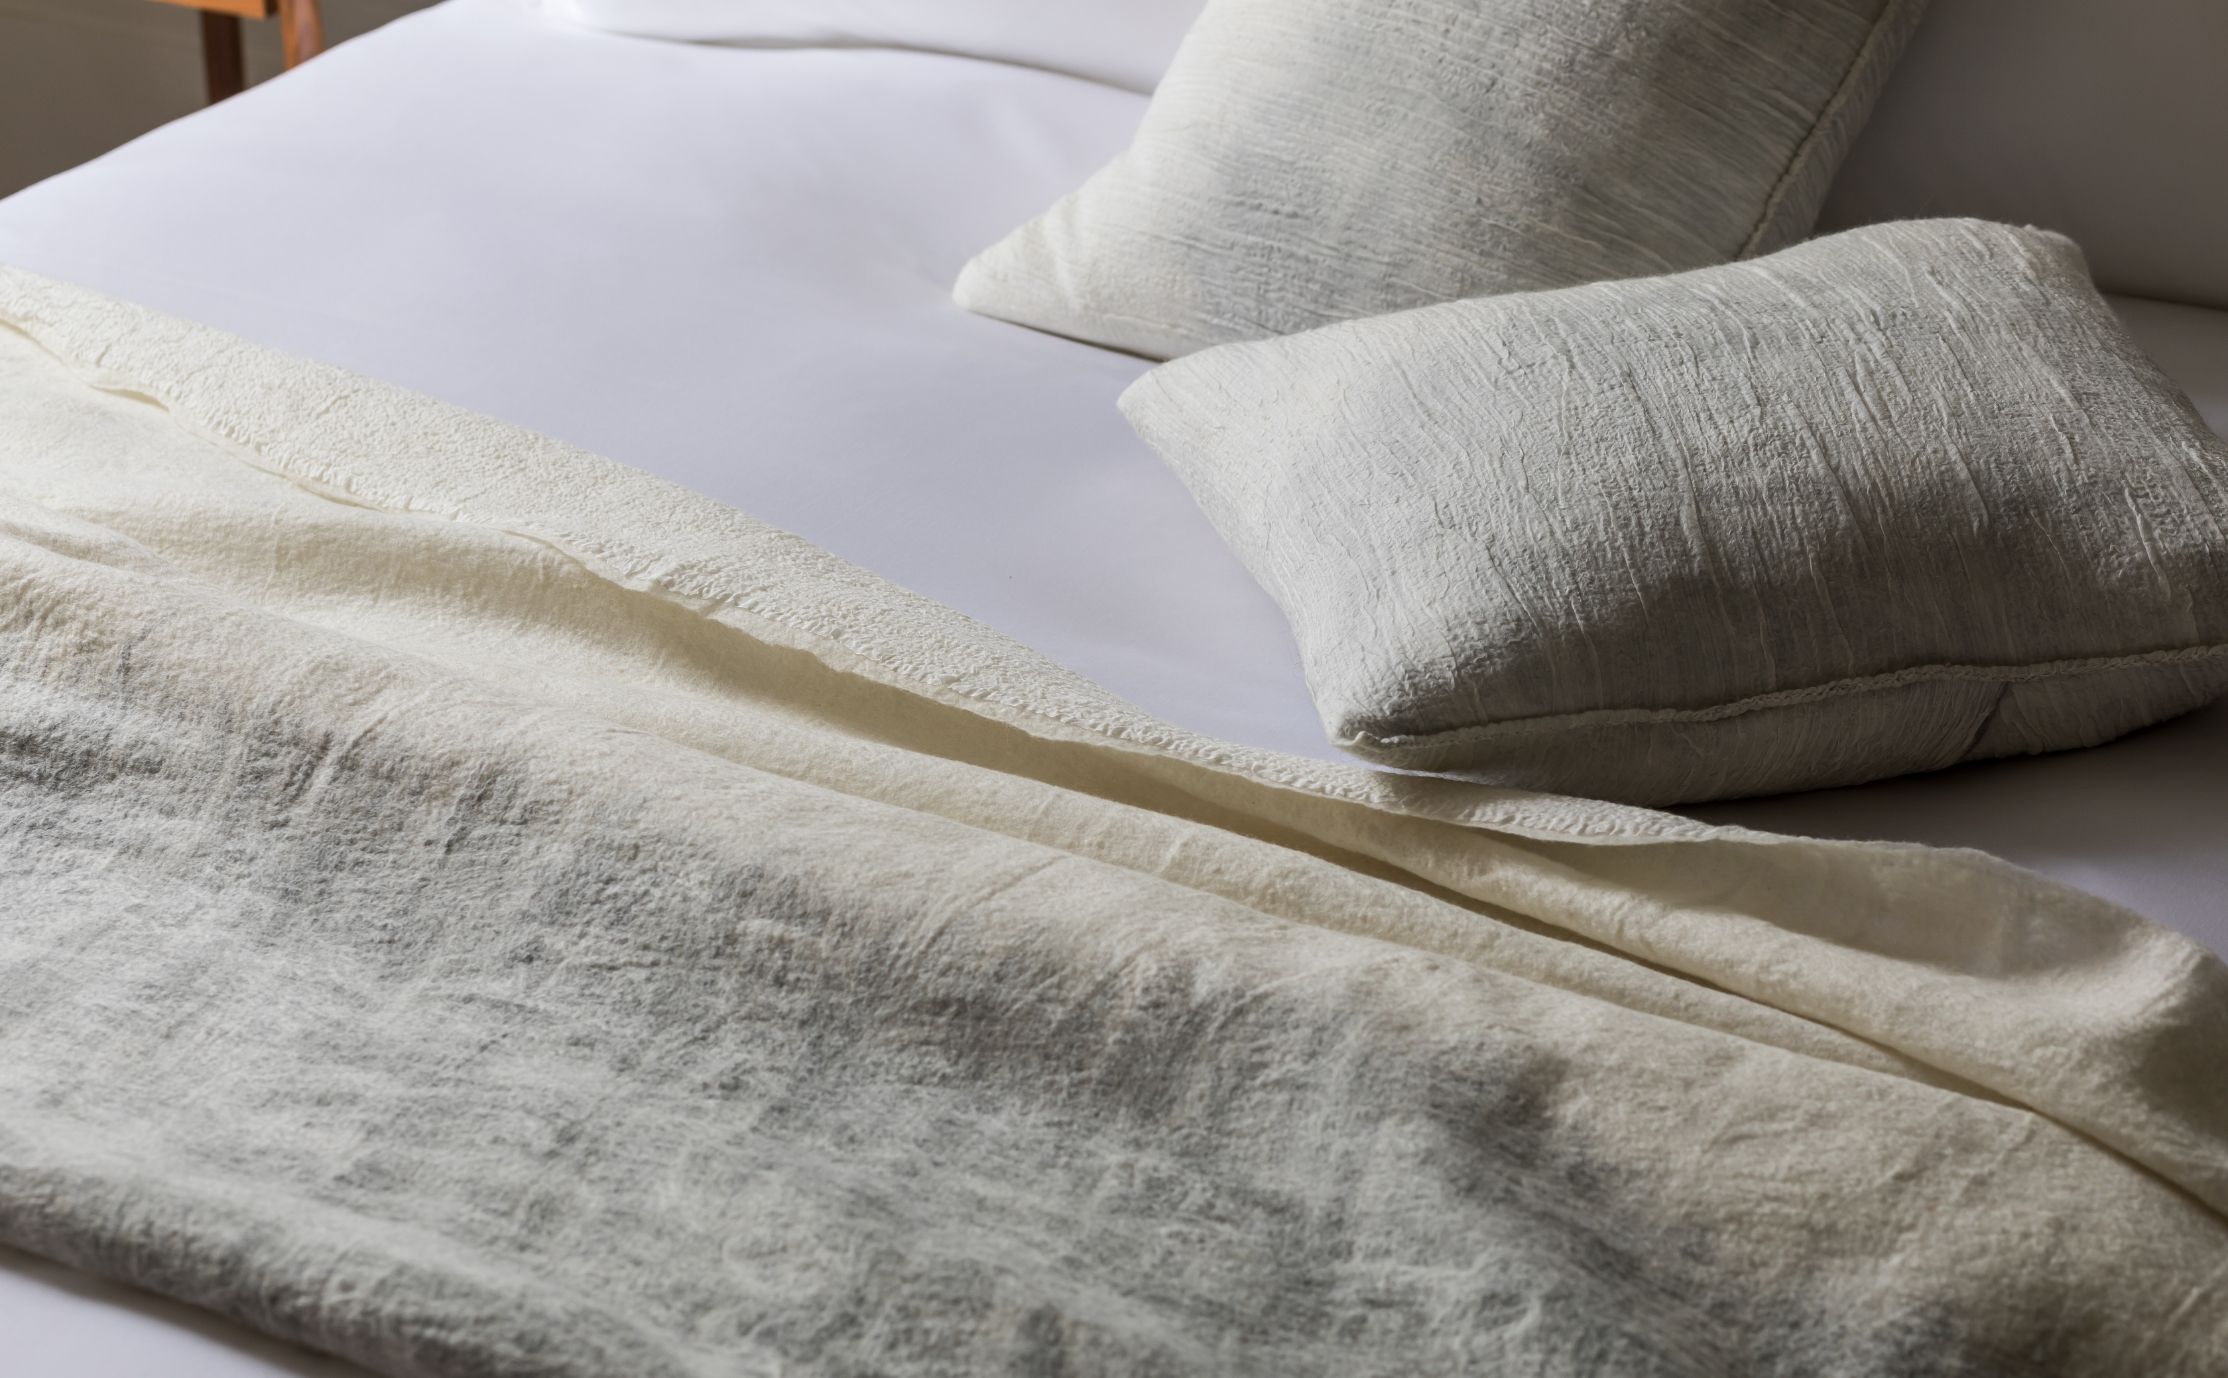 A closeup of bed with textured comforter and shams on white sheets